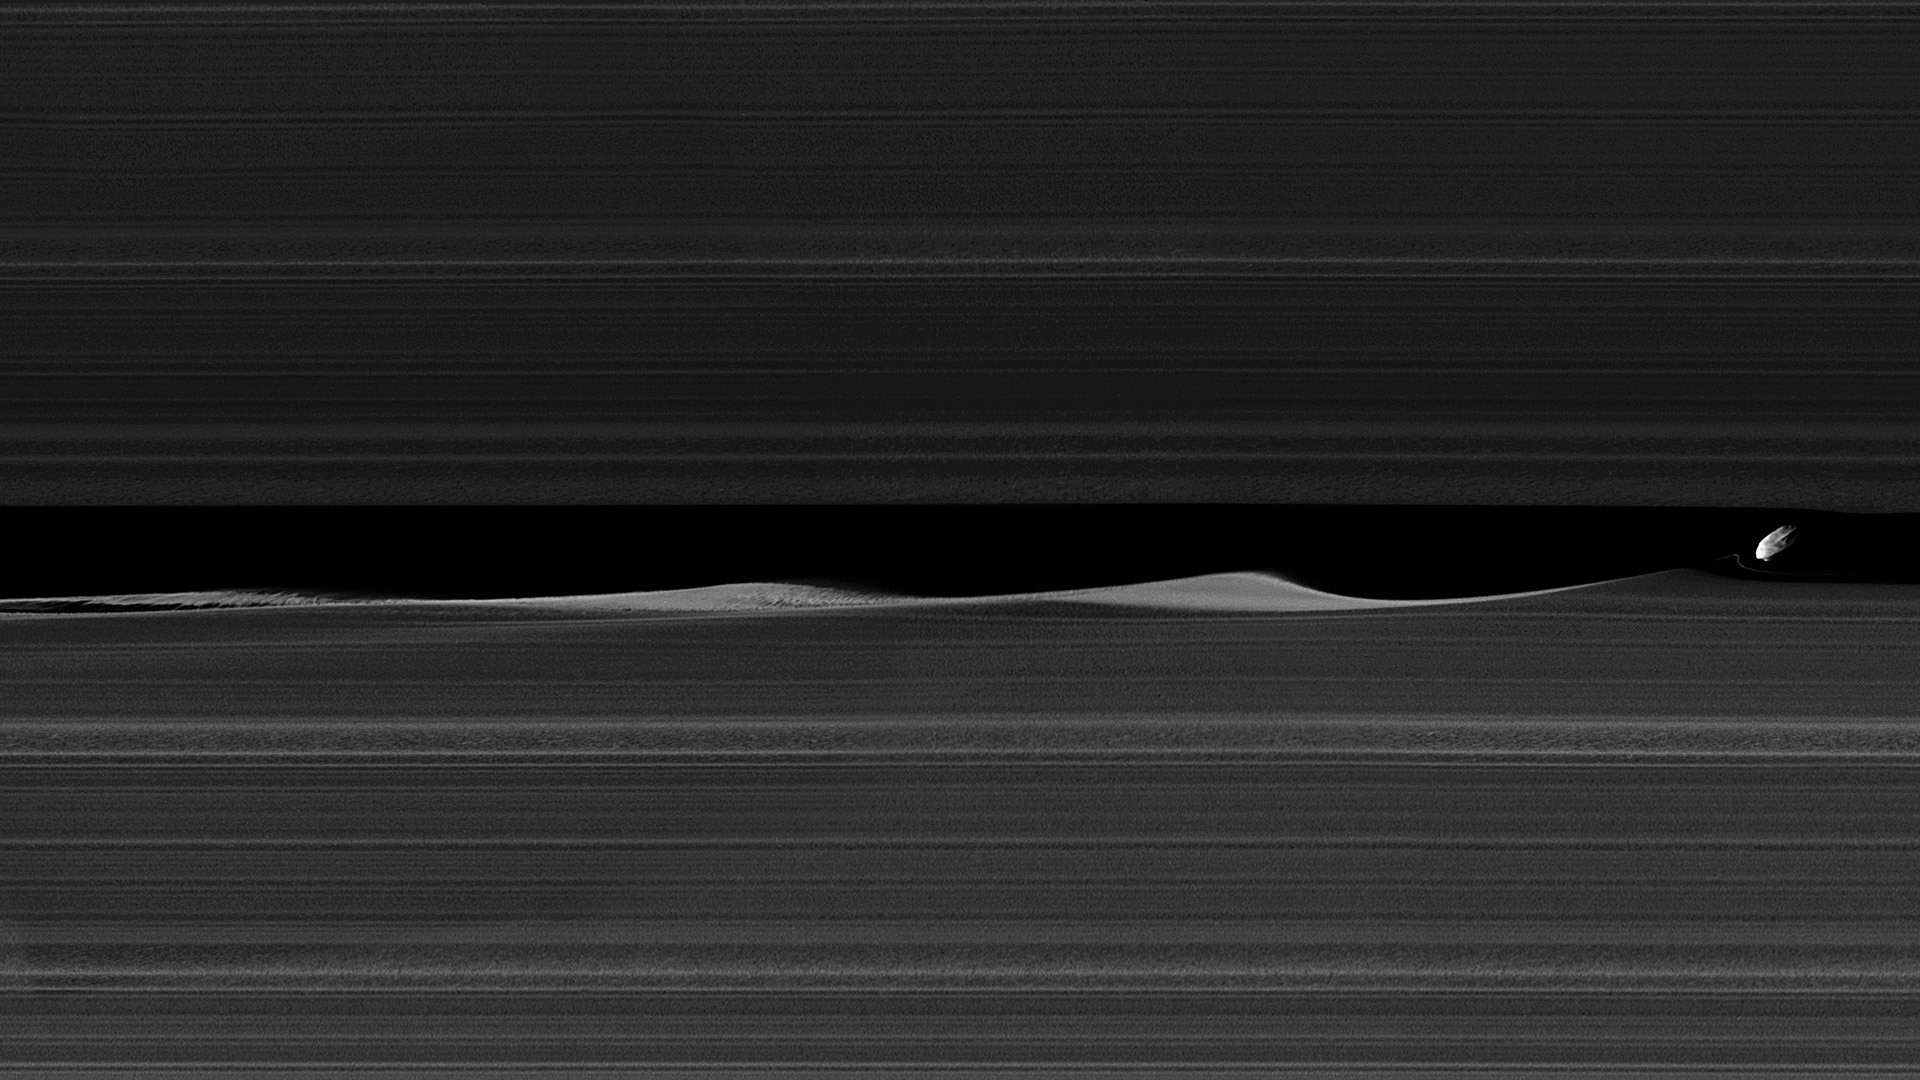 1920x1080 Daphnis, one of Saturn's ring-embedded moons, is featured this view, kicking